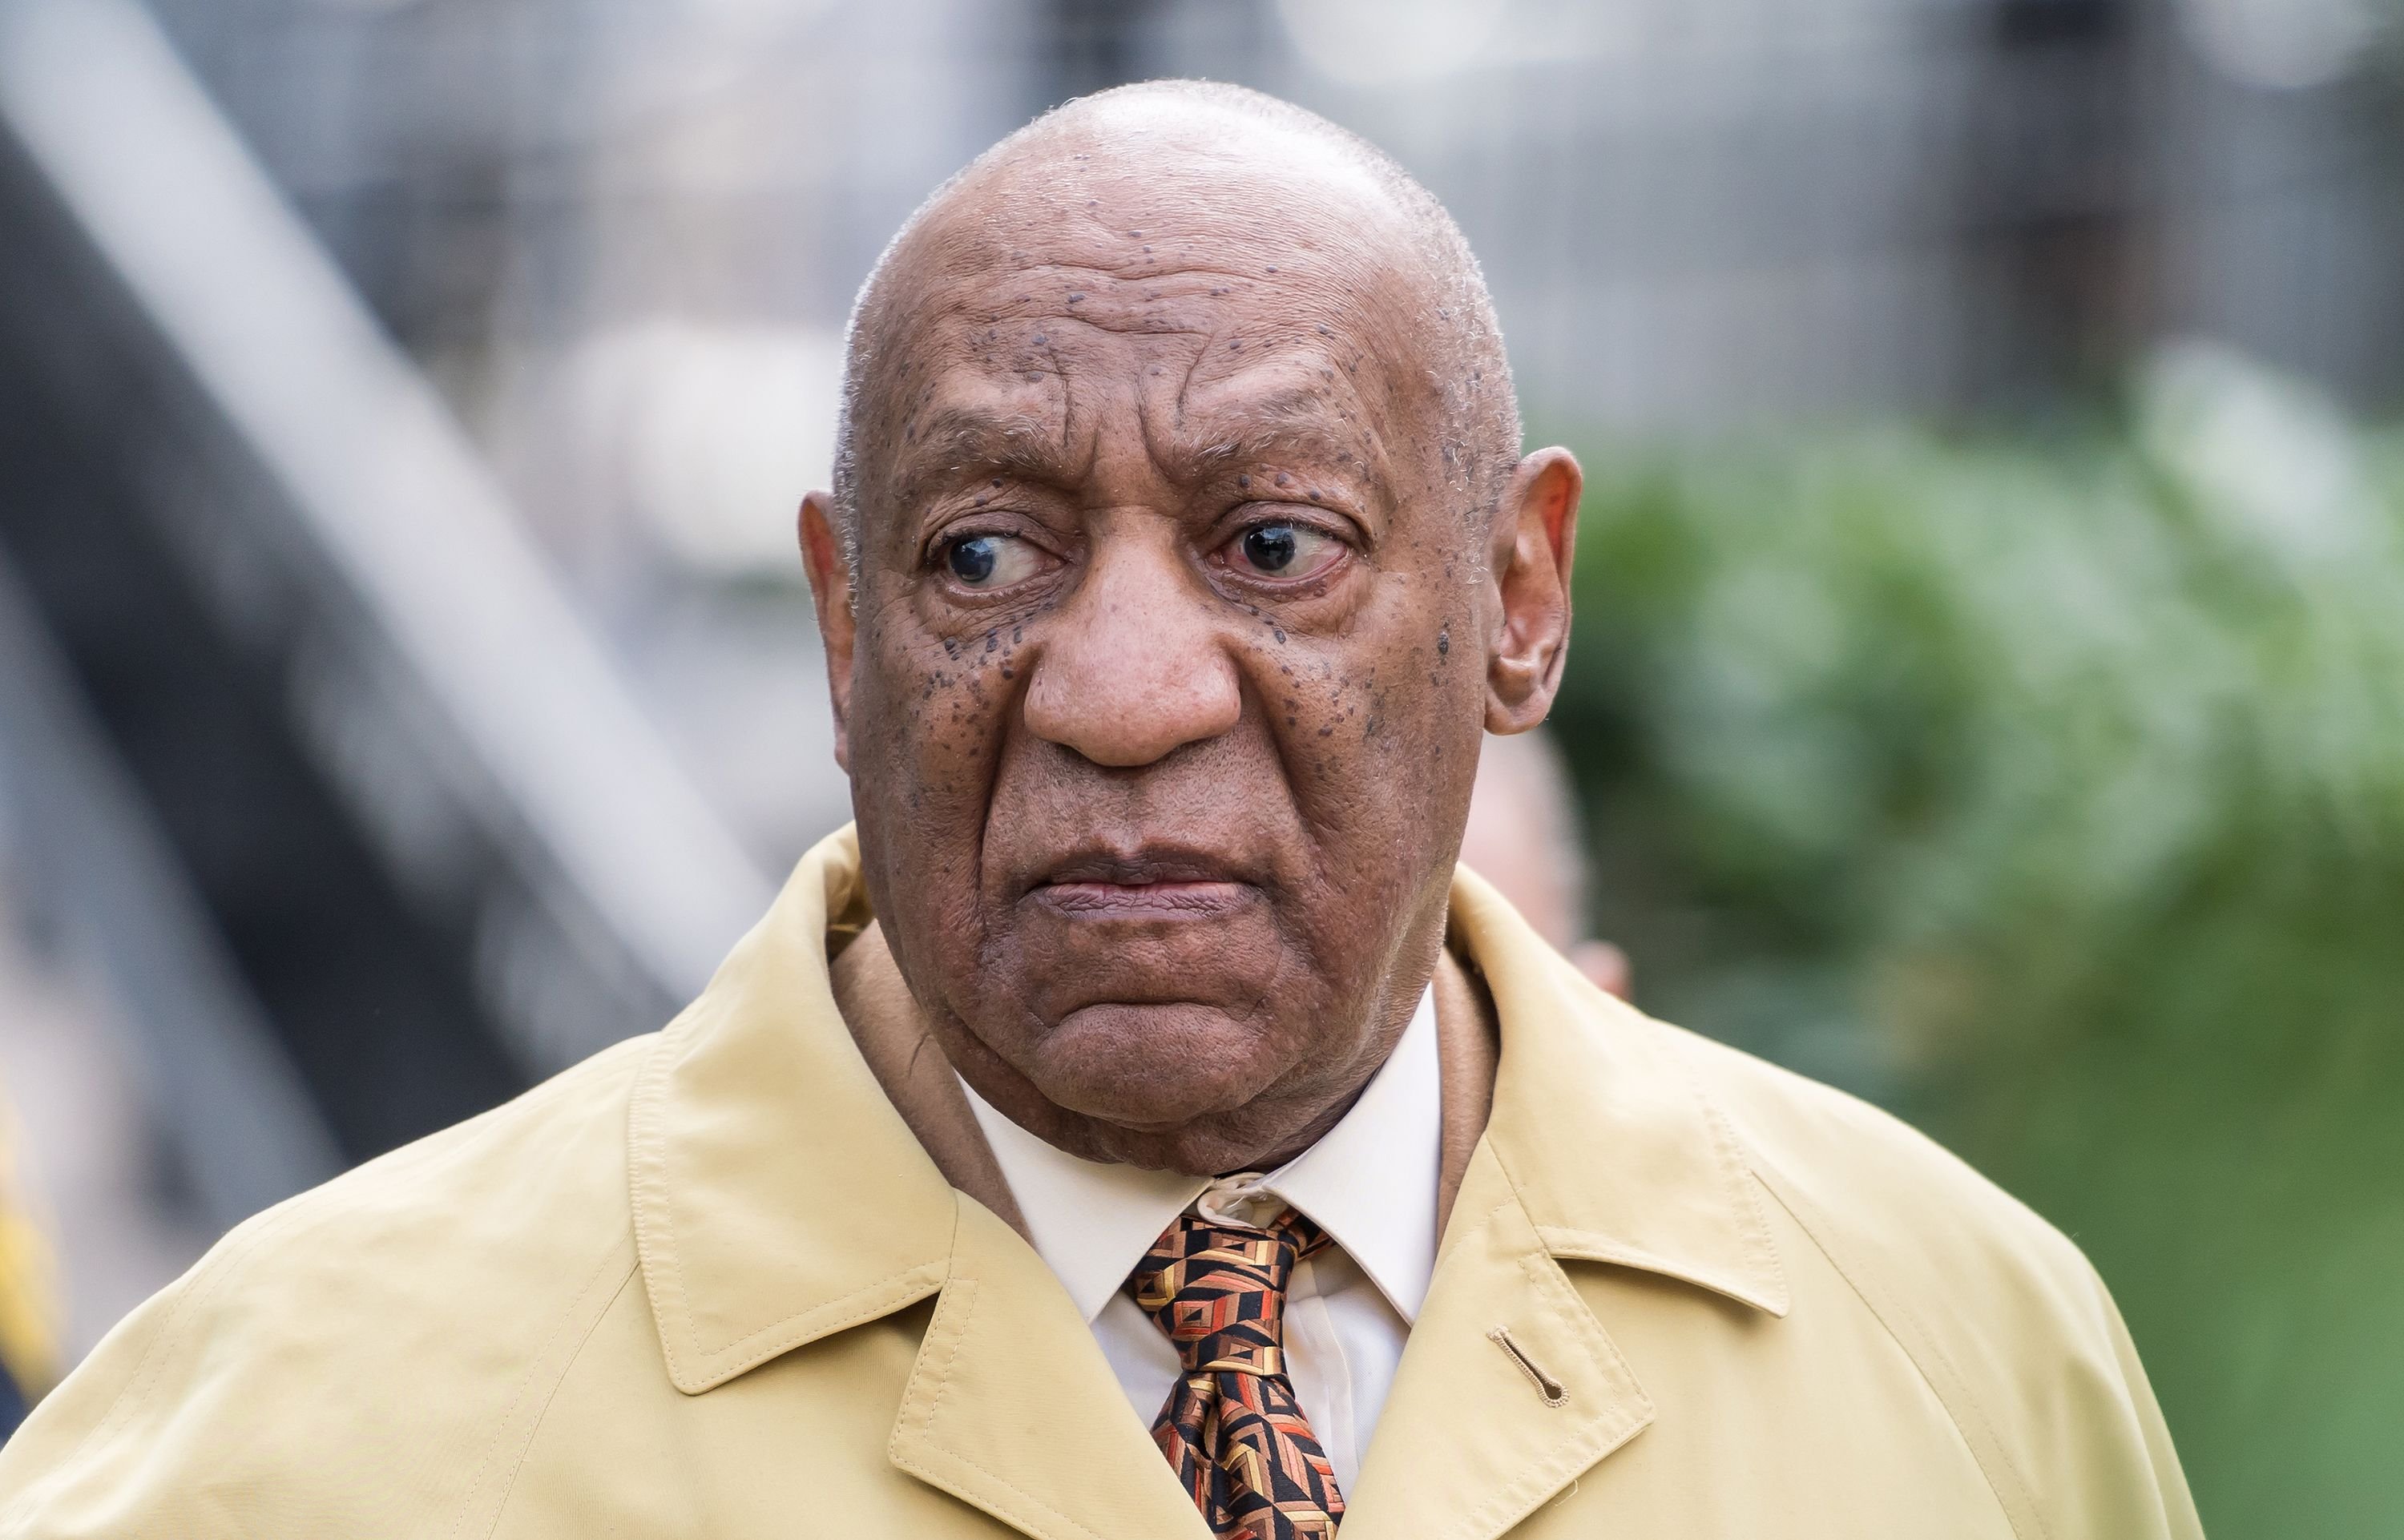 Stand-up comedian and actor Bill Cosby at the Montgomery County Courthouse on February 27, 2017 | Photo: Getty Images